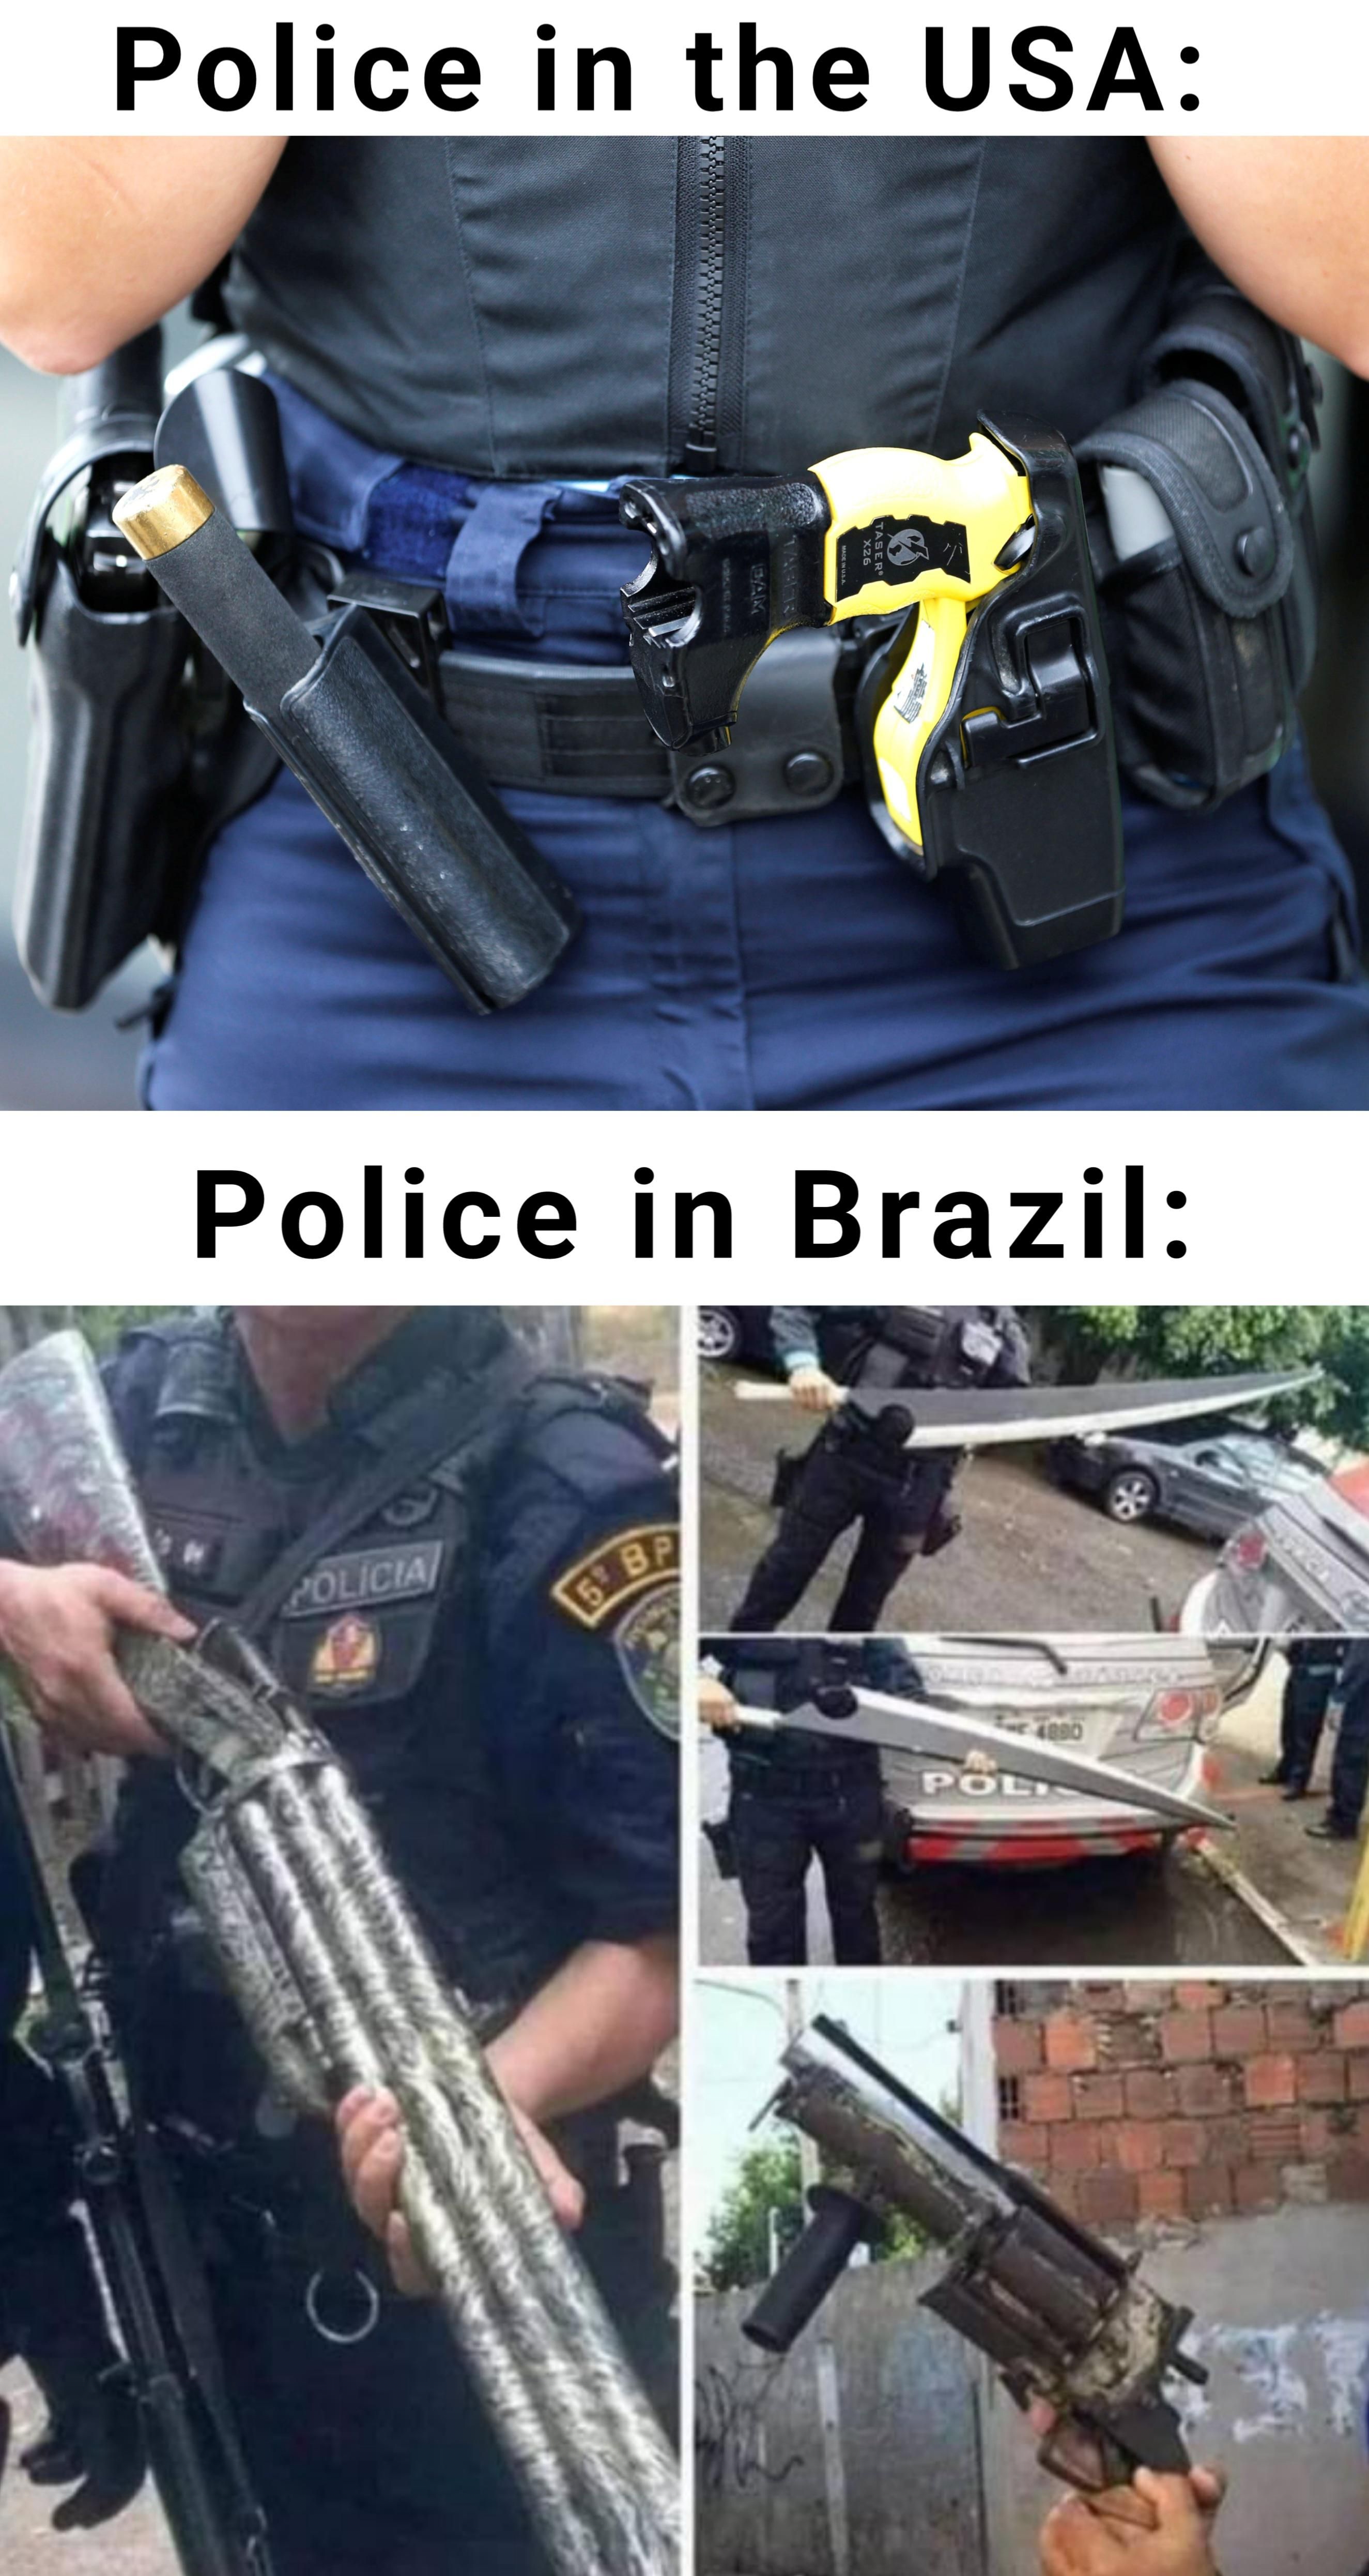 At least Brazil cops look awesome while being corrupt